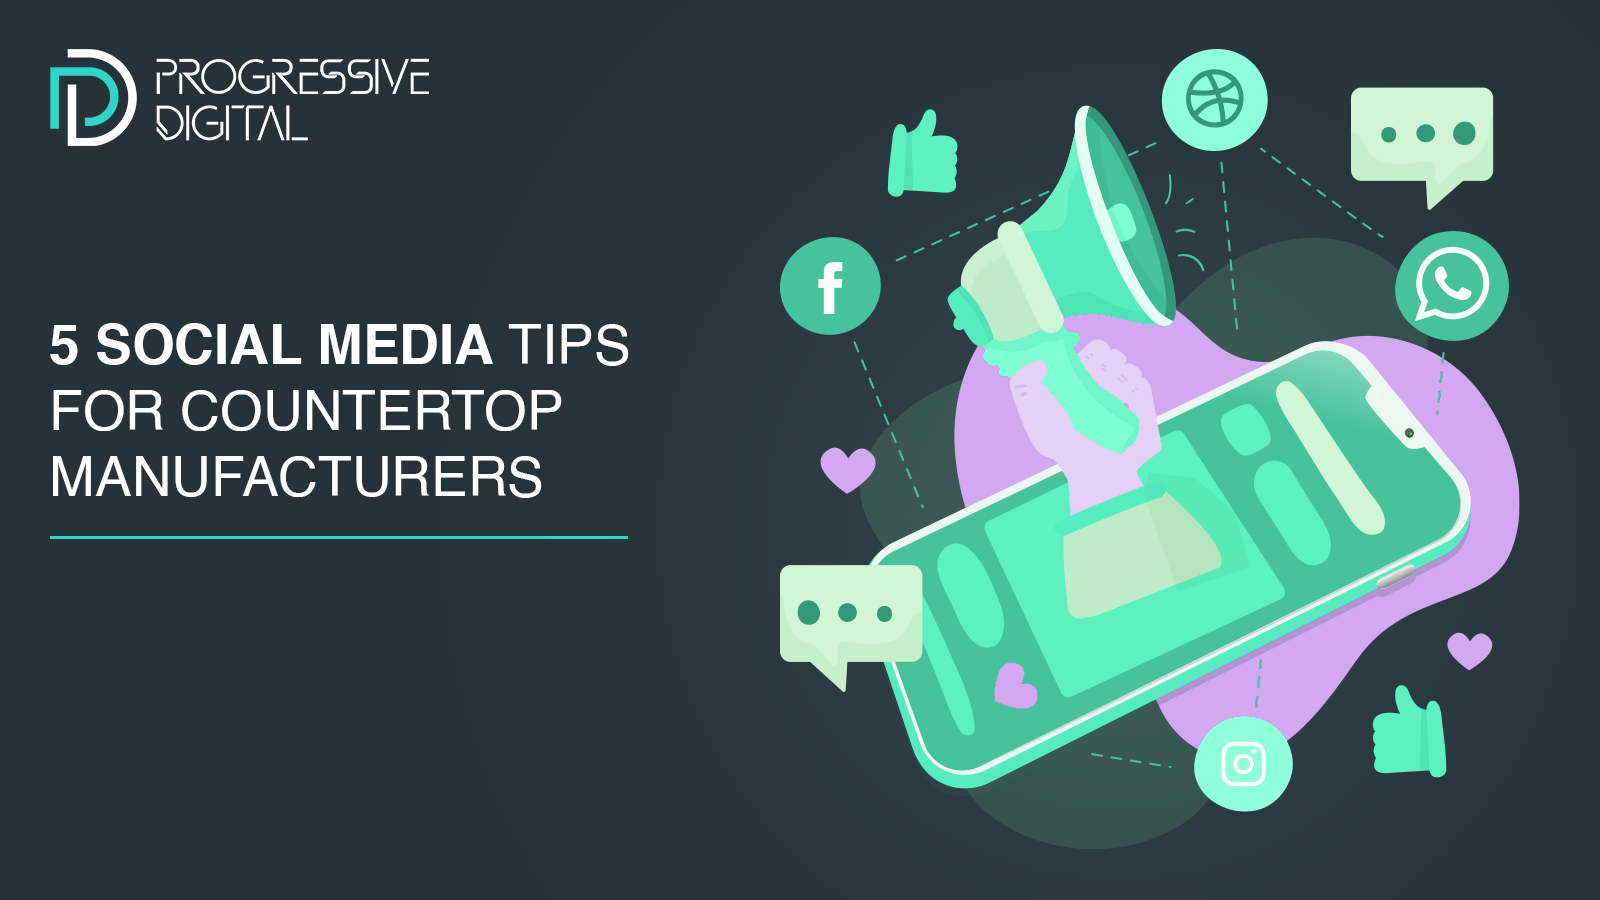 5 Social Media Tips for Countertop Manufacturers